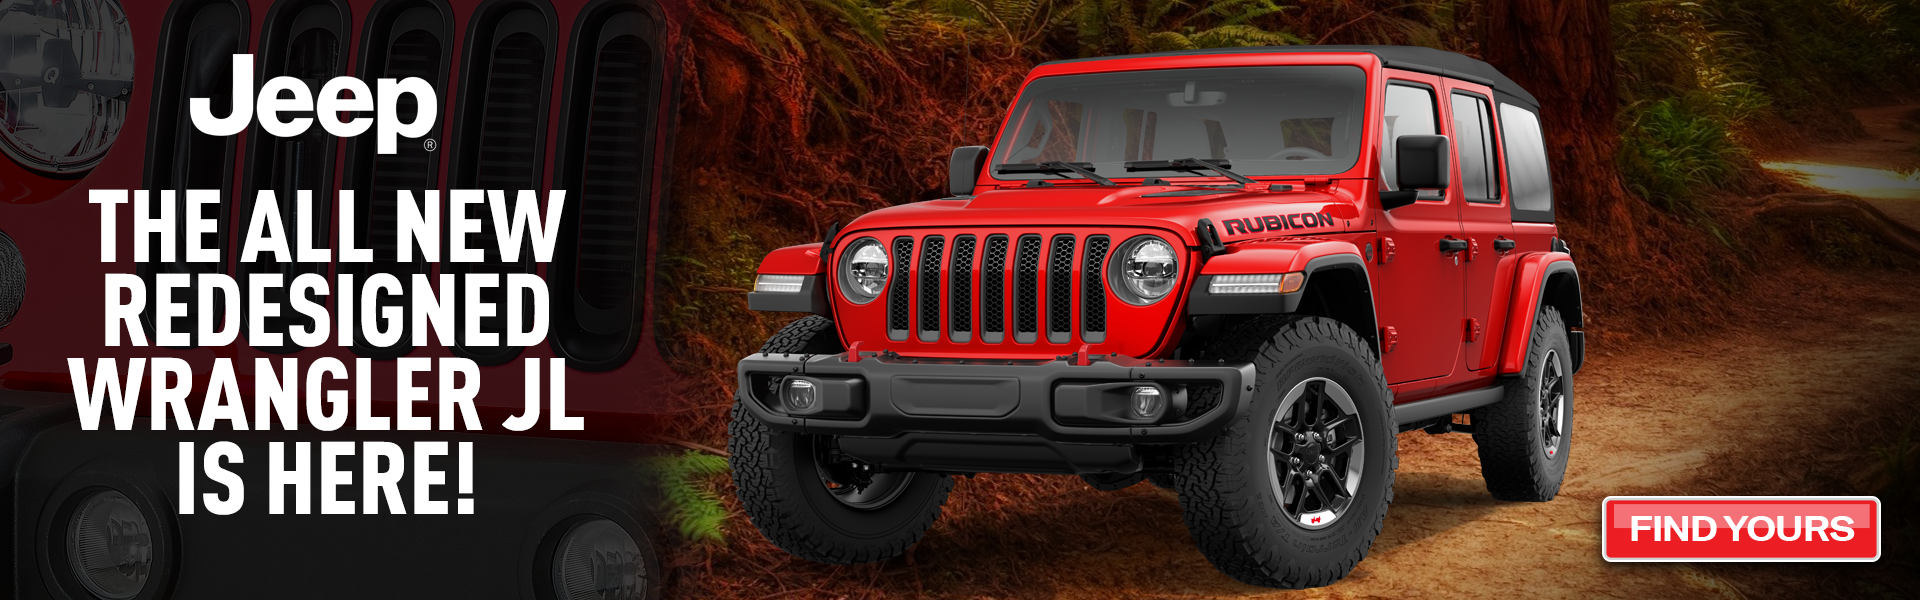 jeep service coupons san diego